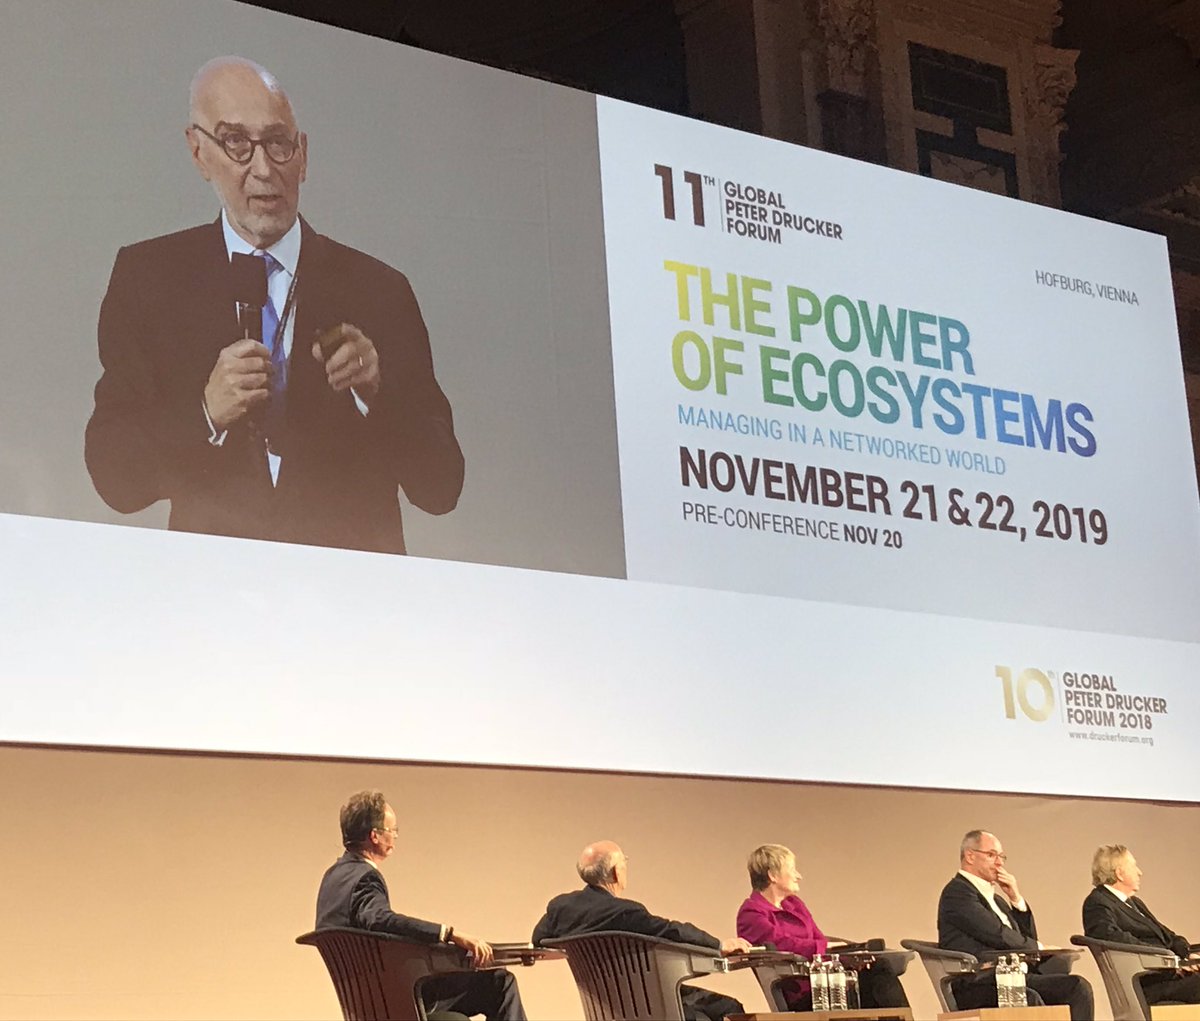 What were the simple but significant gifts of #GPDF18 @GDruckerForum?

1. Optimistic hope for the future 
2. Focused belief that small collective acts make a difference
3. Deeper curiosity about why #questionsaretheanswer when operating on the edge of uncertainty

#GPDF19 next!